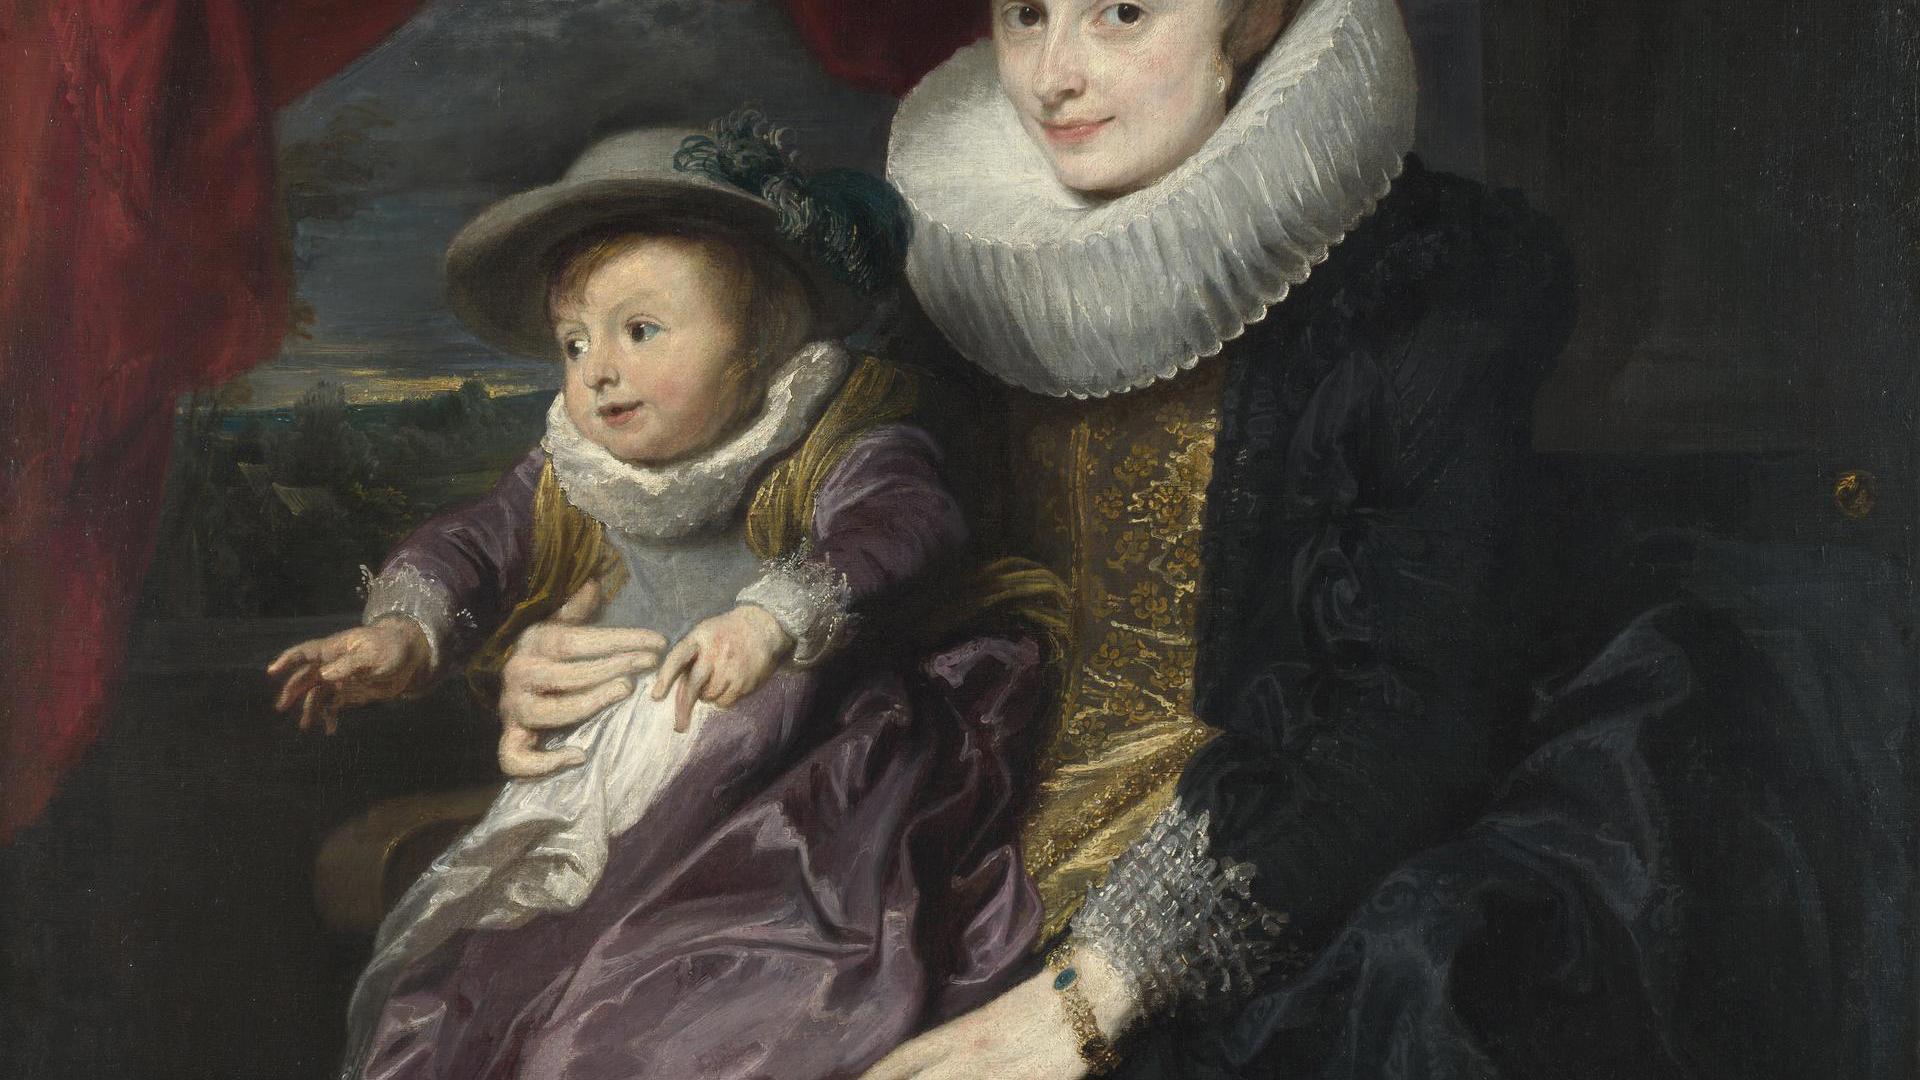 Portrait of a Woman and Child by Anthony van Dyck